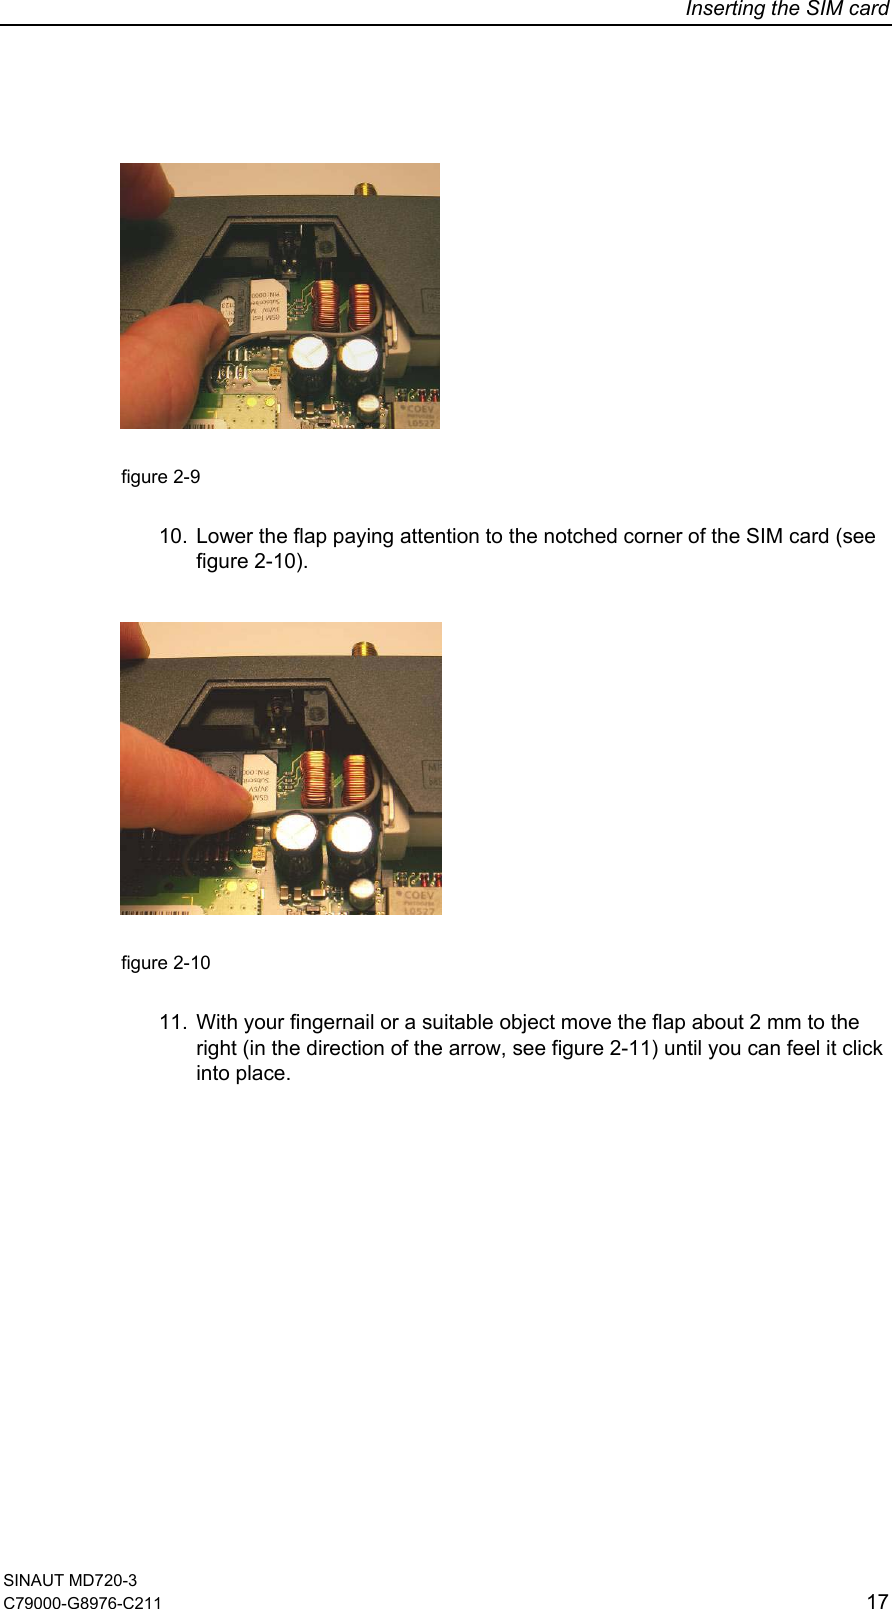 Inserting the SIM card    figure 2-9    10.  Lower the flap paying attention to the notched corner of the SIM card (see figure 2-10).    figure 2-10    11.  With your fingernail or a suitable object move the flap about 2 mm to the right (in the direction of the arrow, see figure 2-11) until you can feel it click into place. SINAUT MD720-3 C79000-G8976-C211   17 